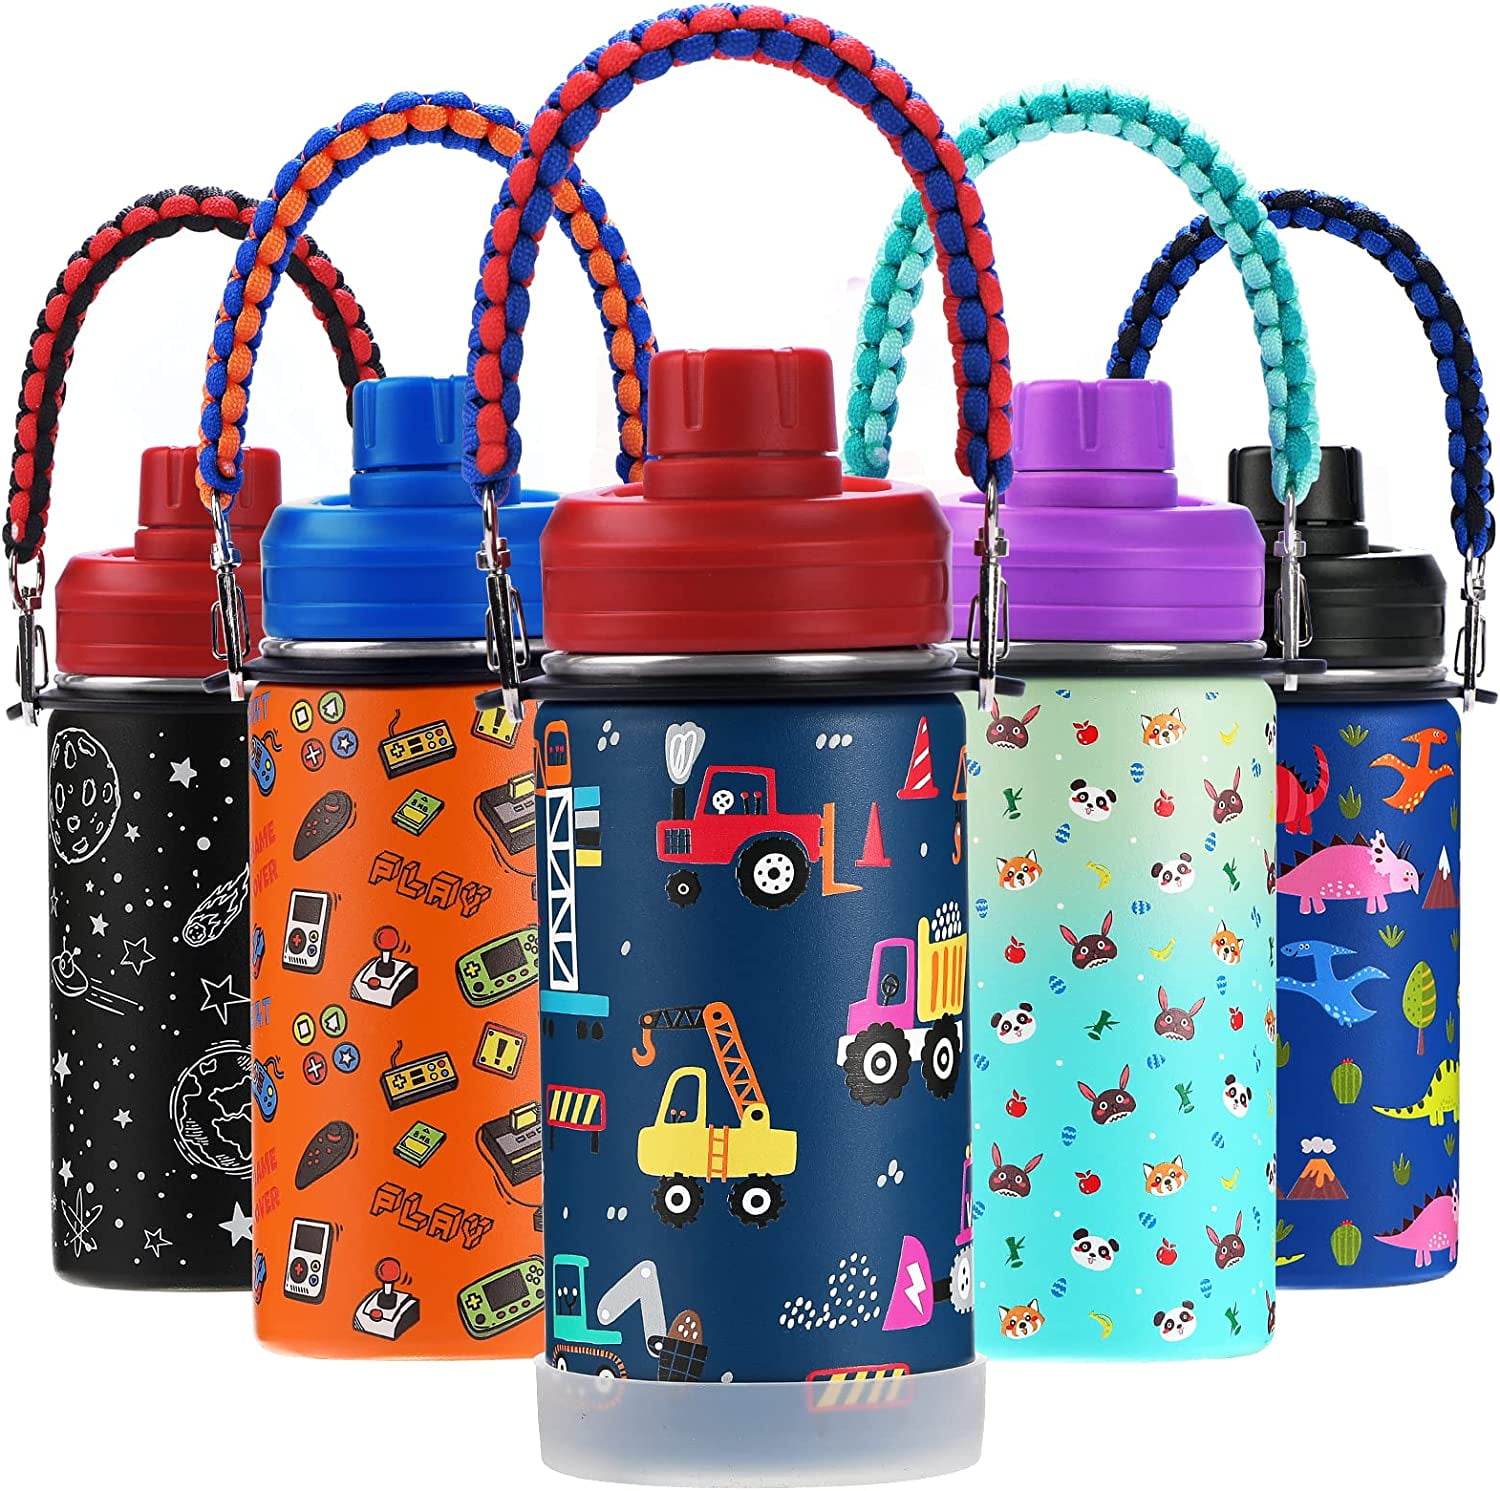  Volhoply 16 OZ Kids Water Bottle Bulk 2 Pack,Insulated